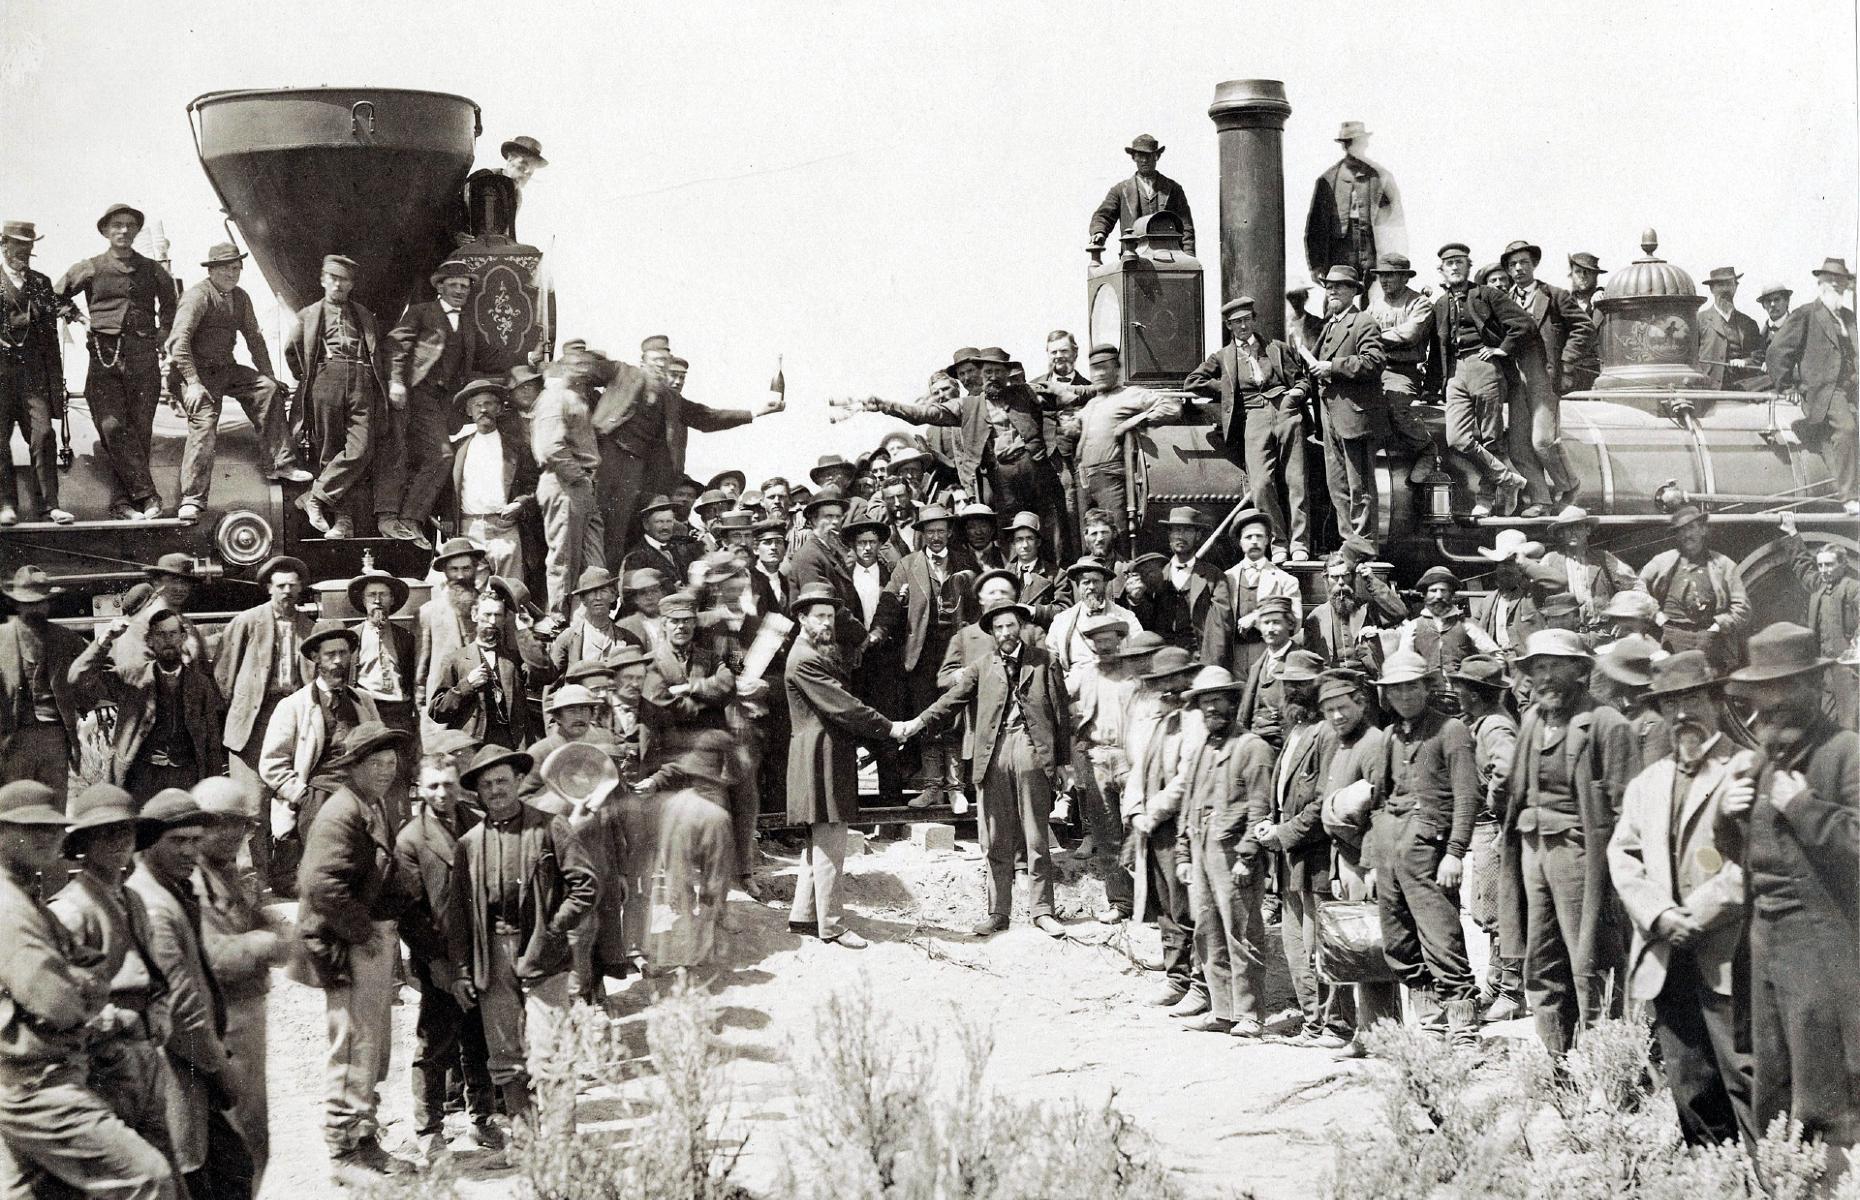 <p>On May 10, 1869, the railway's eastern and western construction crews met in the middle, on a patch of high ground in Utah known as Promontory Summit. Here, the management of the Central Pacific and Union Pacific railroads met for a celebration (pictured) and drove a ceremonial golden spike into the ground to mark the exact point the tracks touched. From now on, Americans could travel from sea to shining sea by a single mode of transport: the railway.</p>